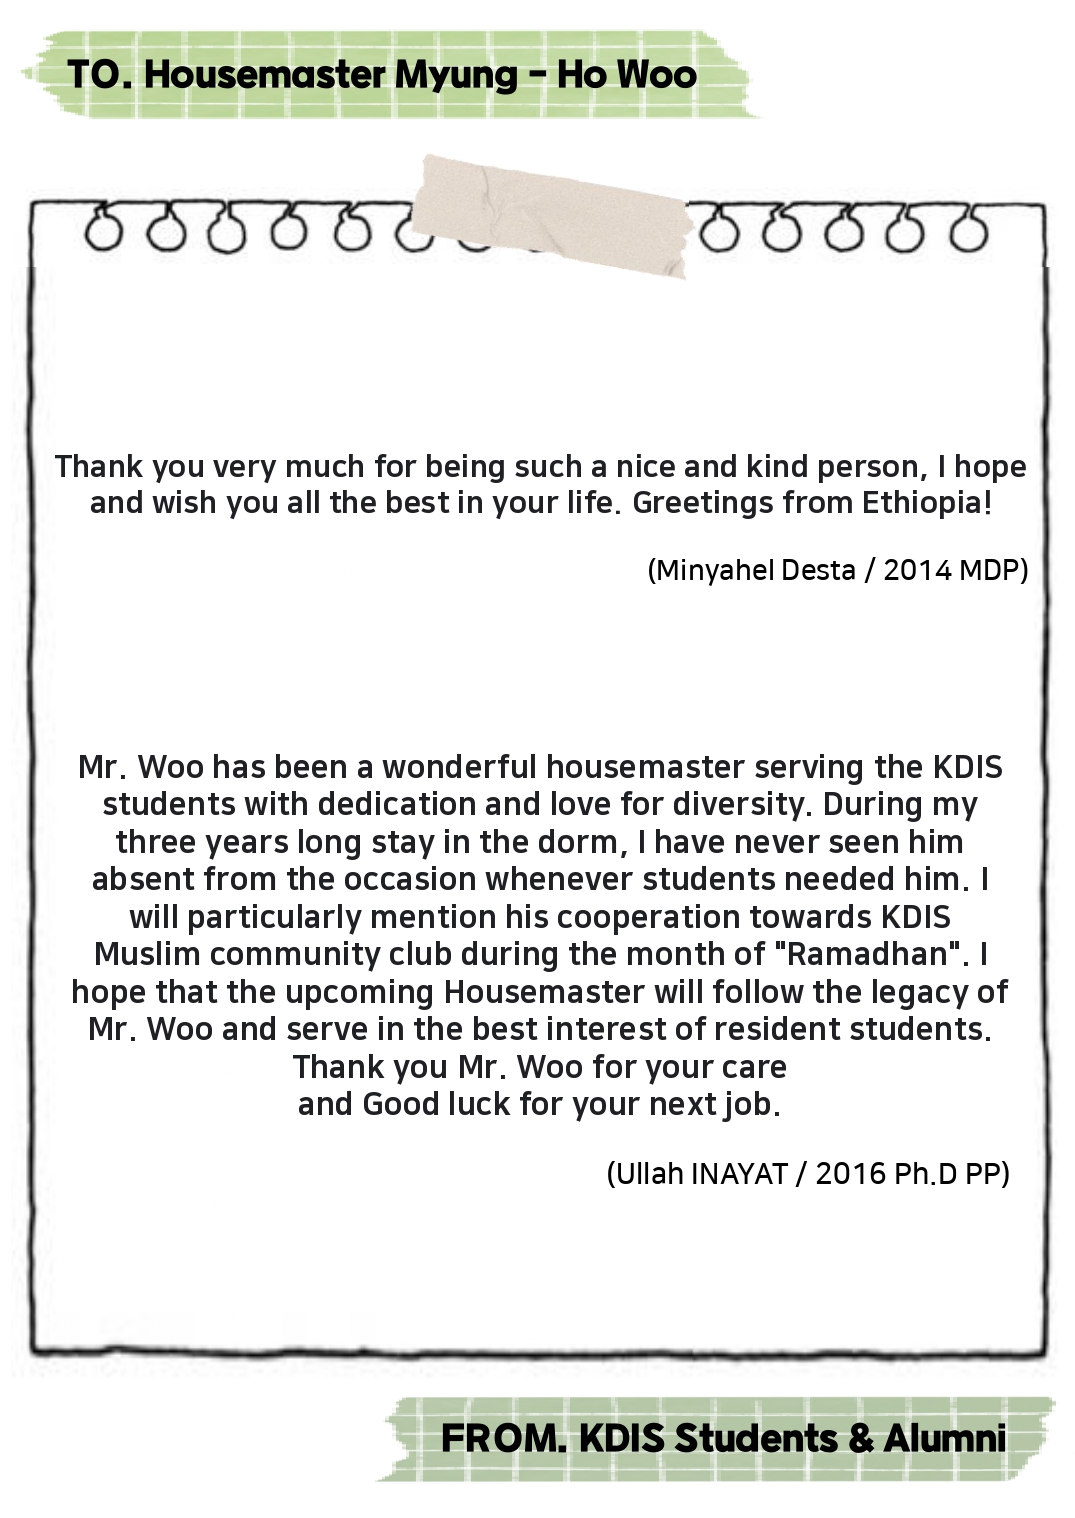 Thank you Housemaster Myung-ho Woo -Messages from KDIS Students and Alumni 사진11